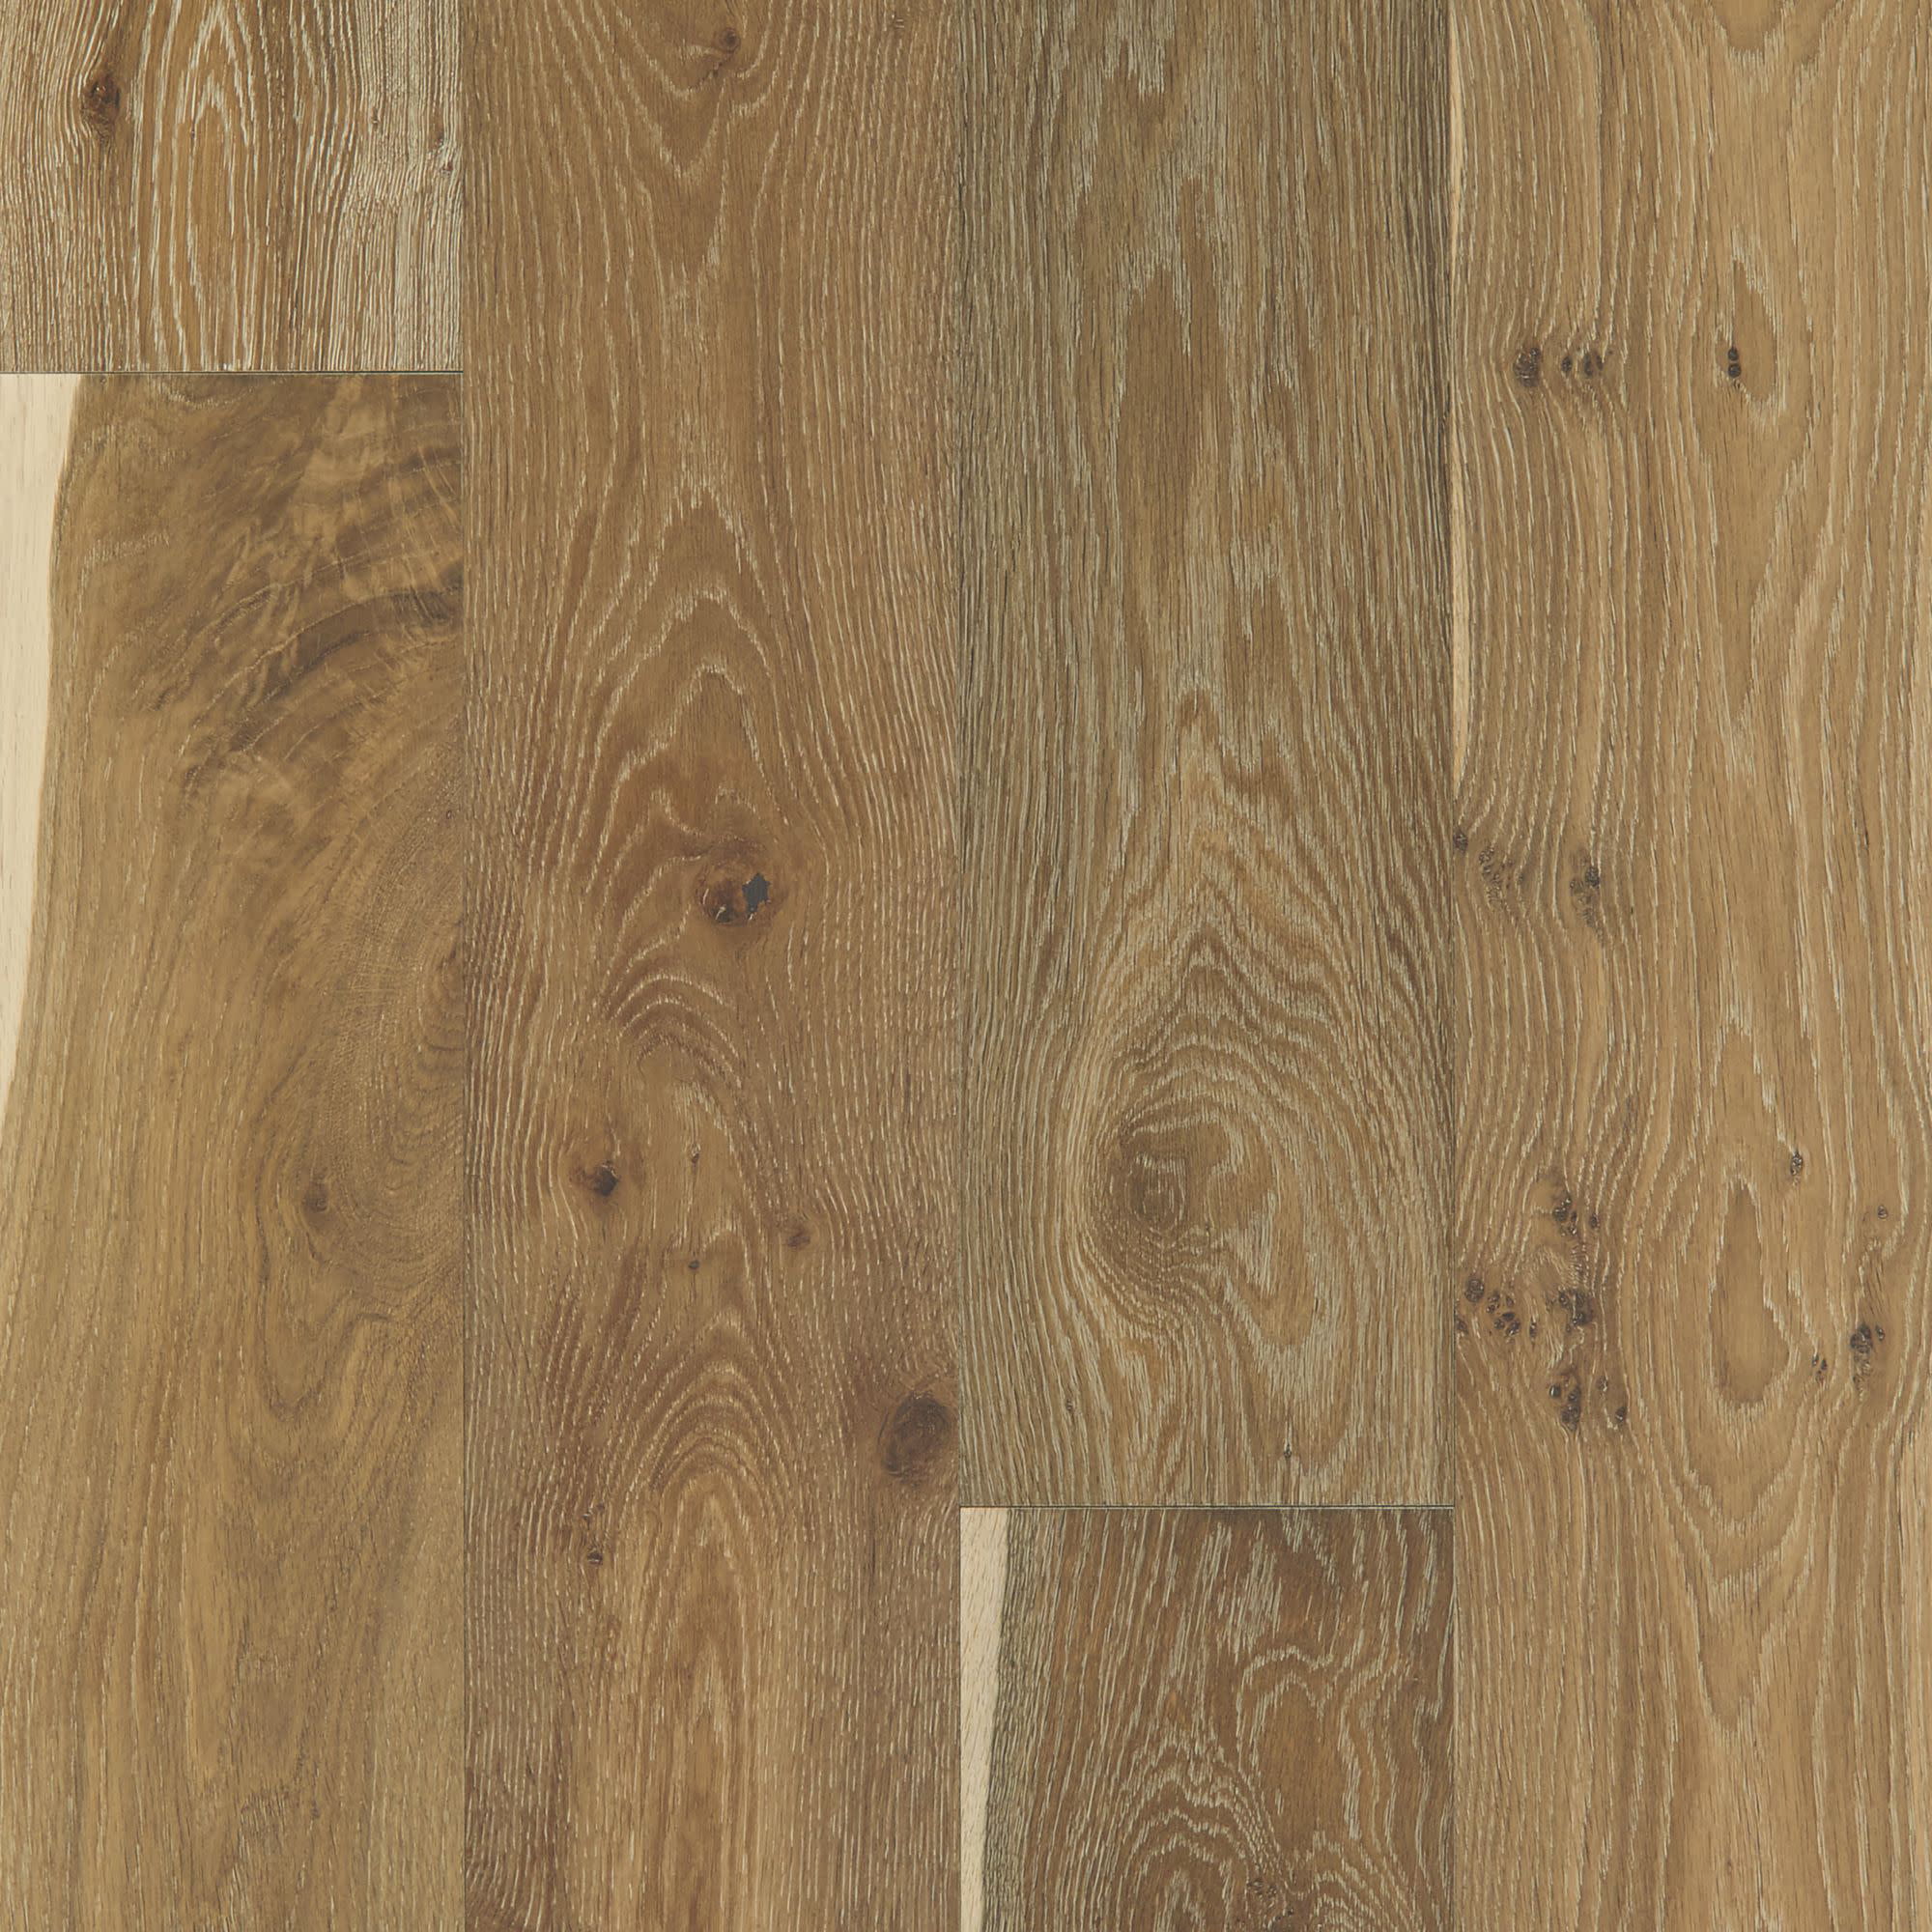 Shaw Sw707 Expressions 7 1 2 Wide Wire, 1 2 Engineered Hardwood Floors